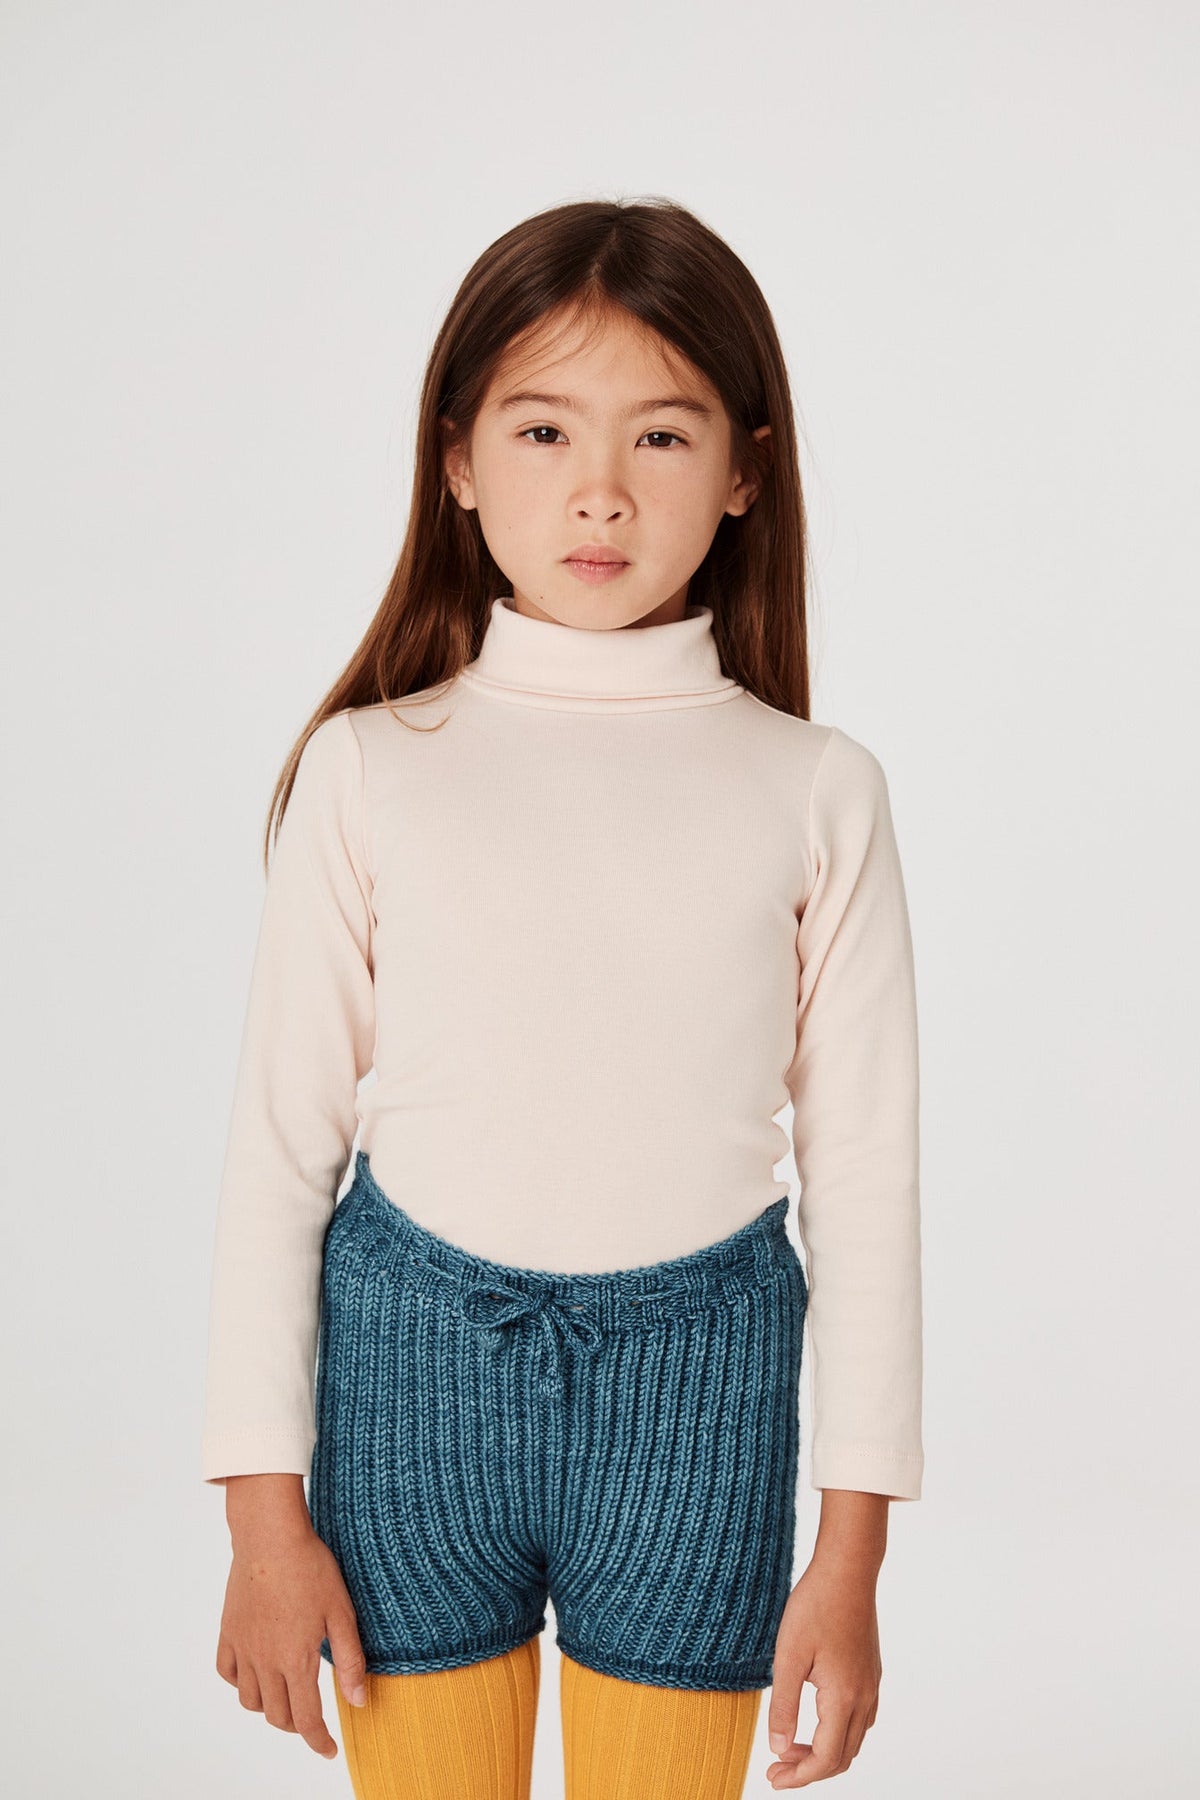 Turtleneck - Dune+Model is 48 inches tall, 47lbs, wearing a size 4-5y